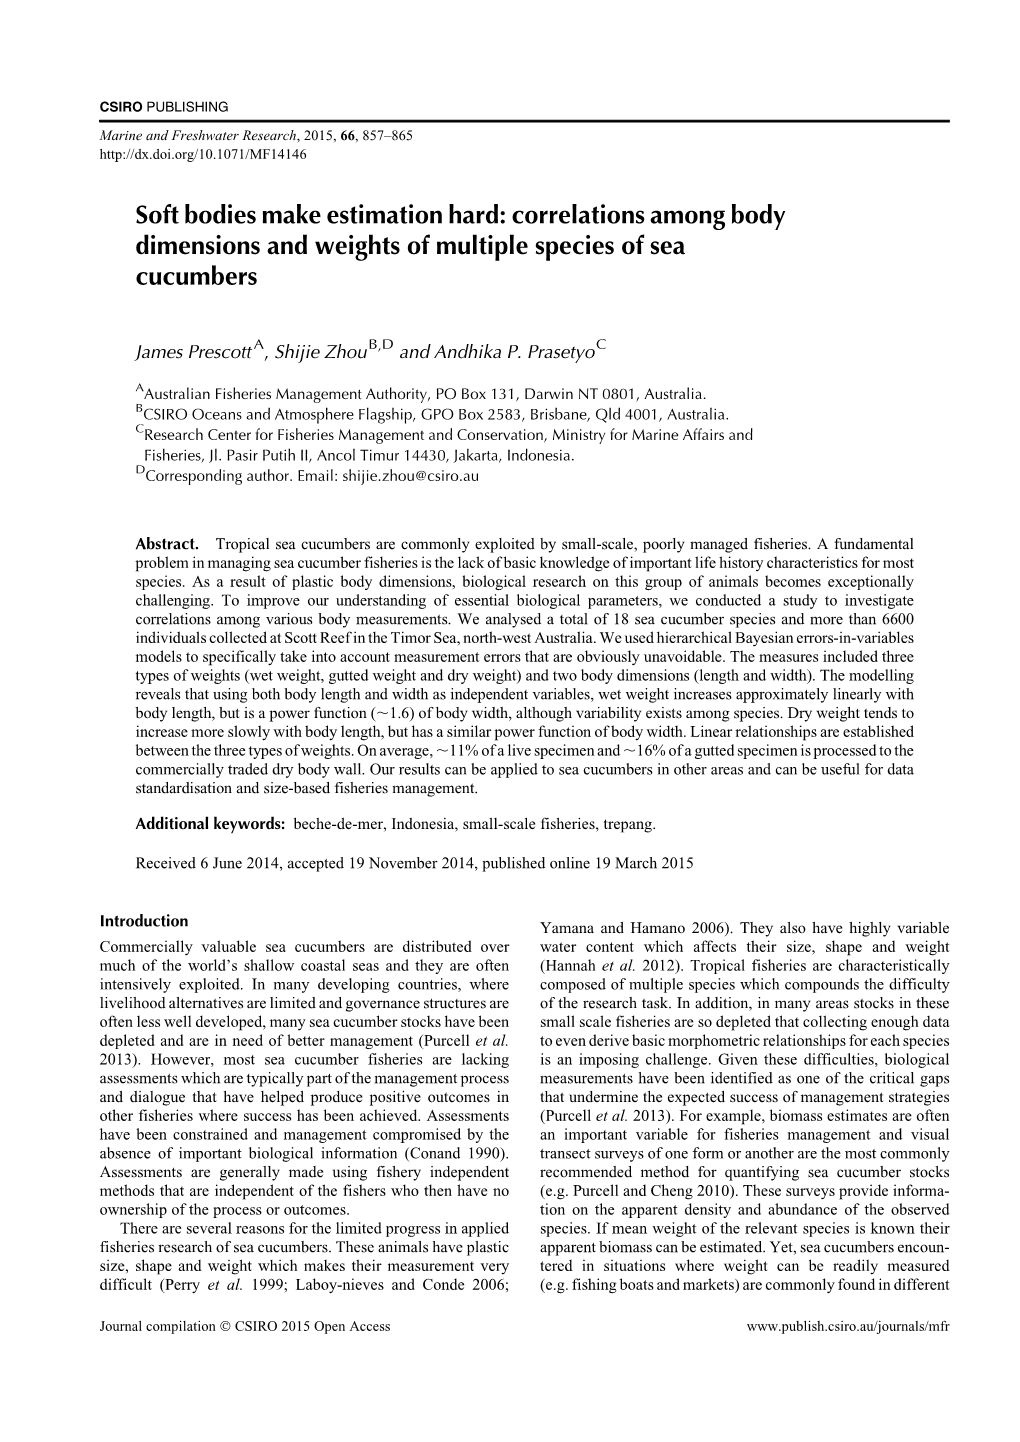 Correlations Among Body Dimensions and Weights of Multiple Species of Sea Cucumbers